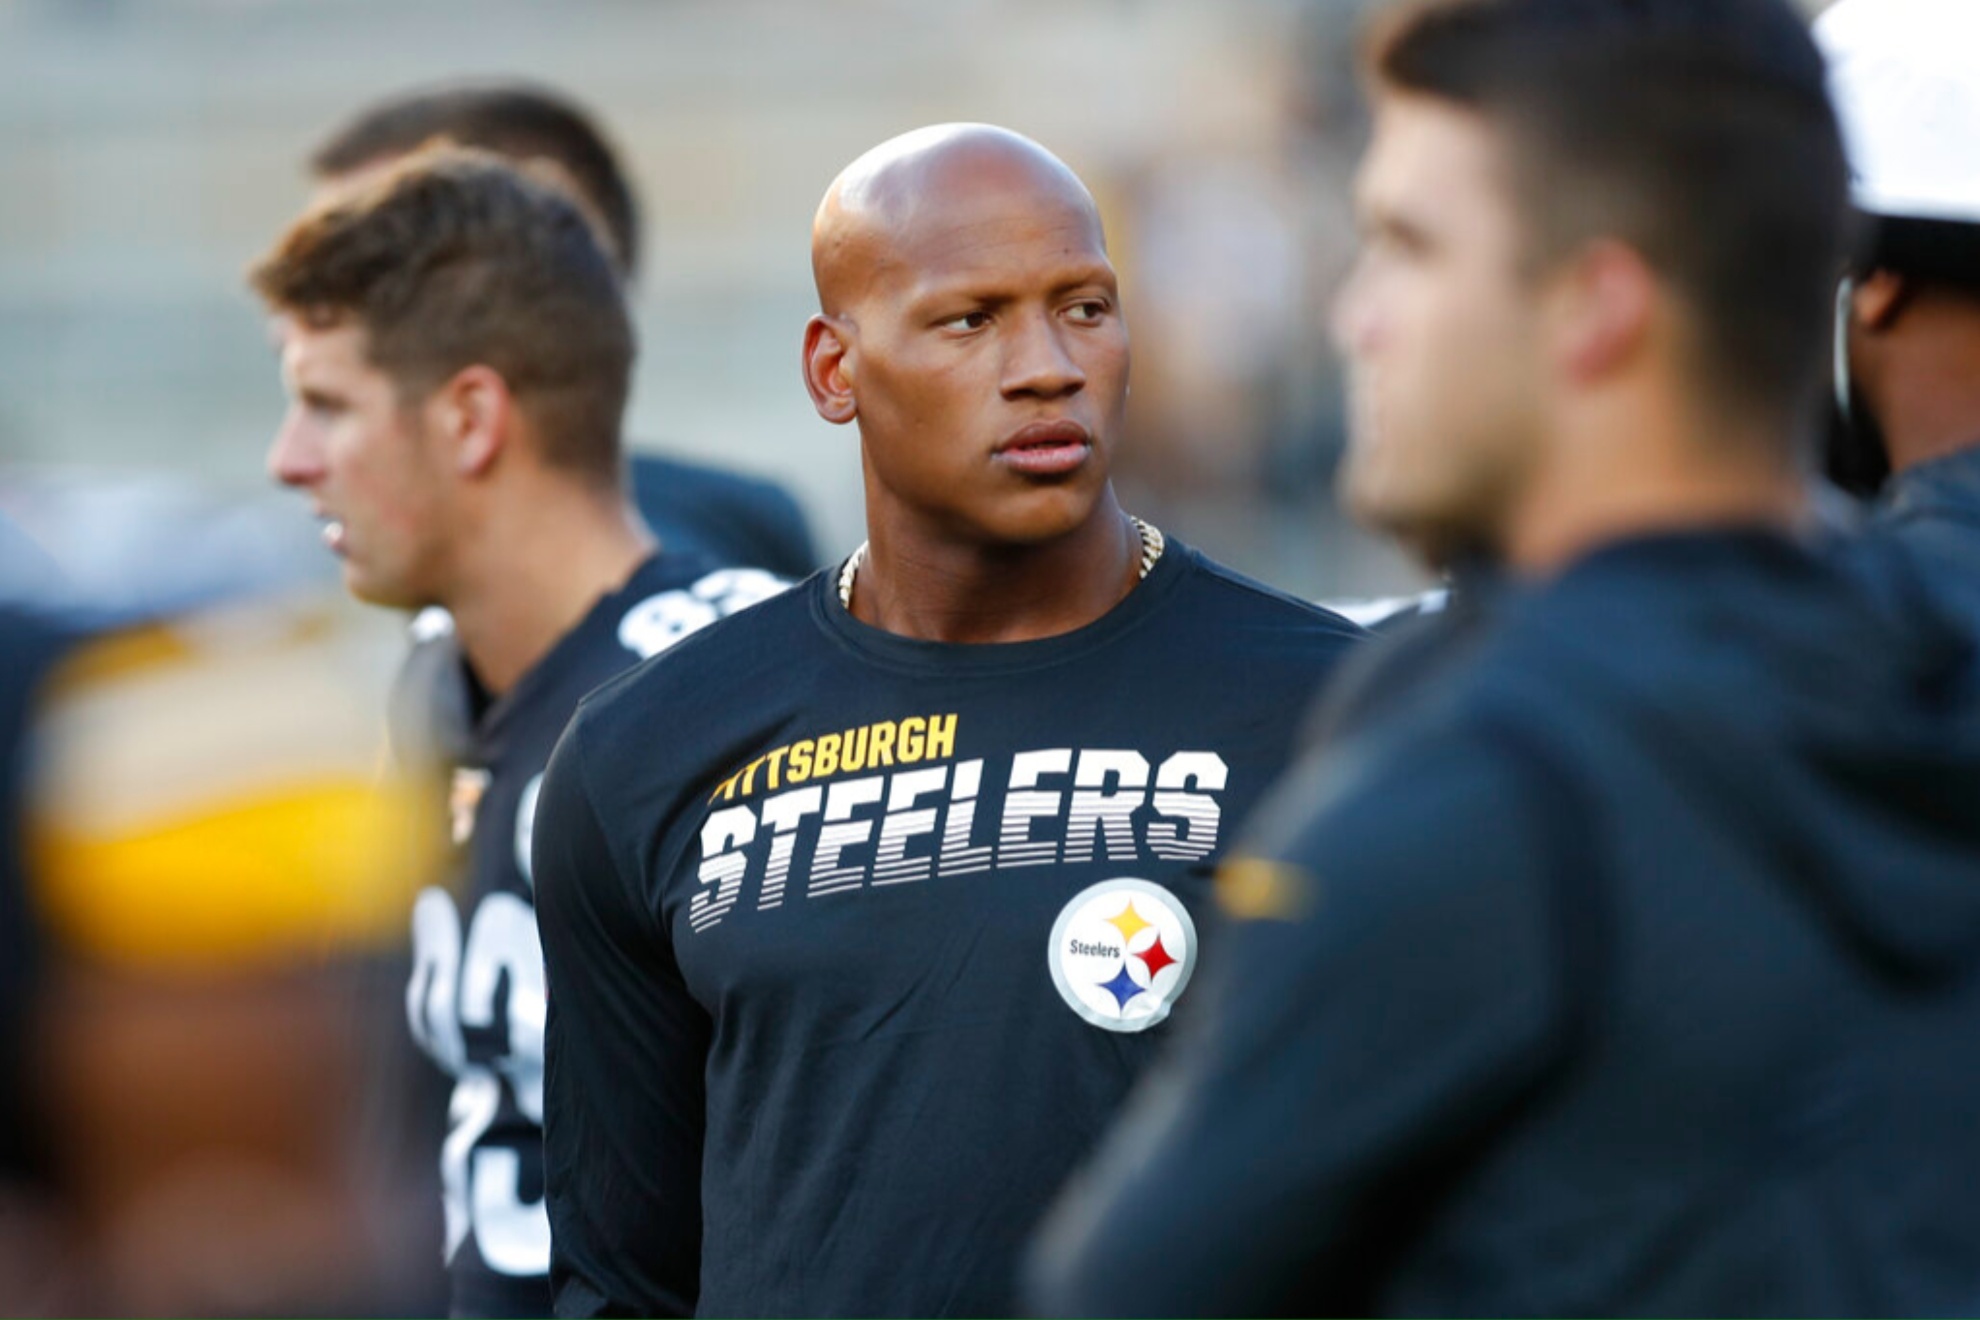 Former Steelers linebacker, Ryan Shazier, has been accused of cheating by his wife